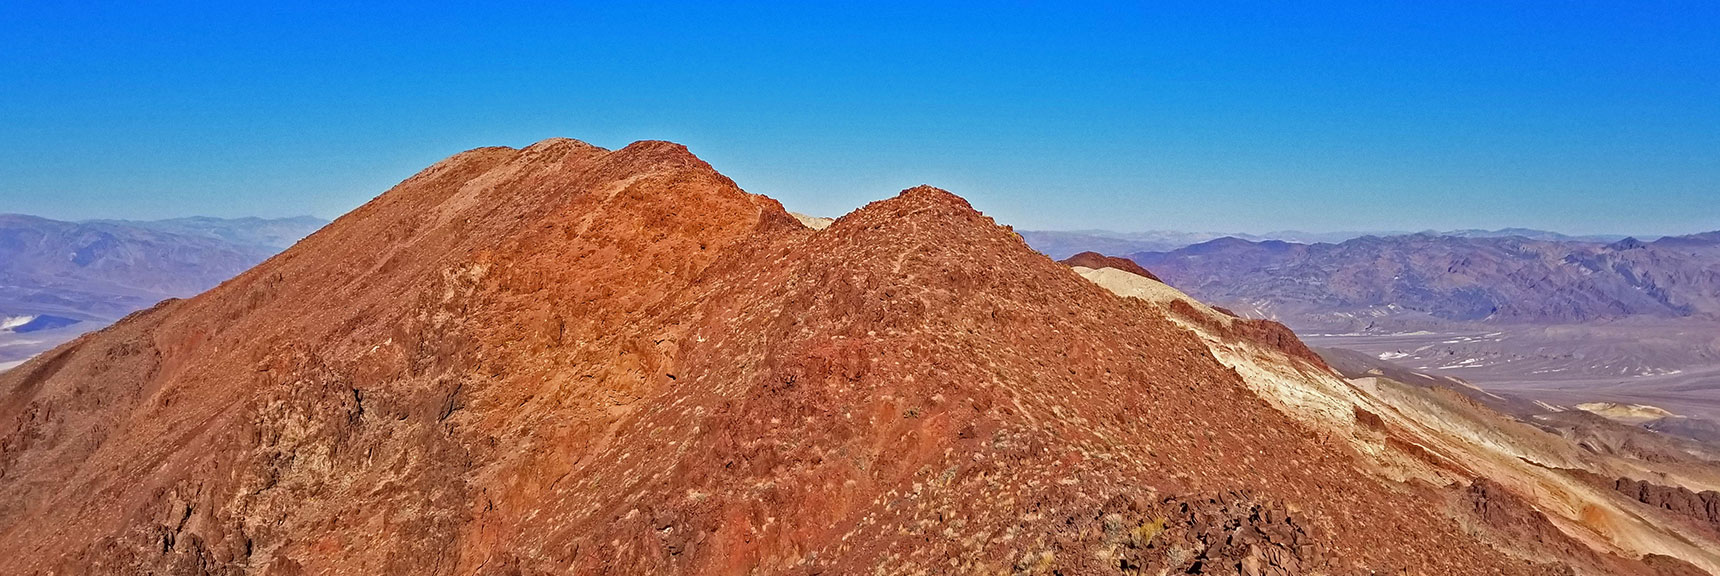 High View of Mt. Perry's High Red Rock Summit Ridge | Dante's View to Mt. Perry | Death Valley National Park, CA